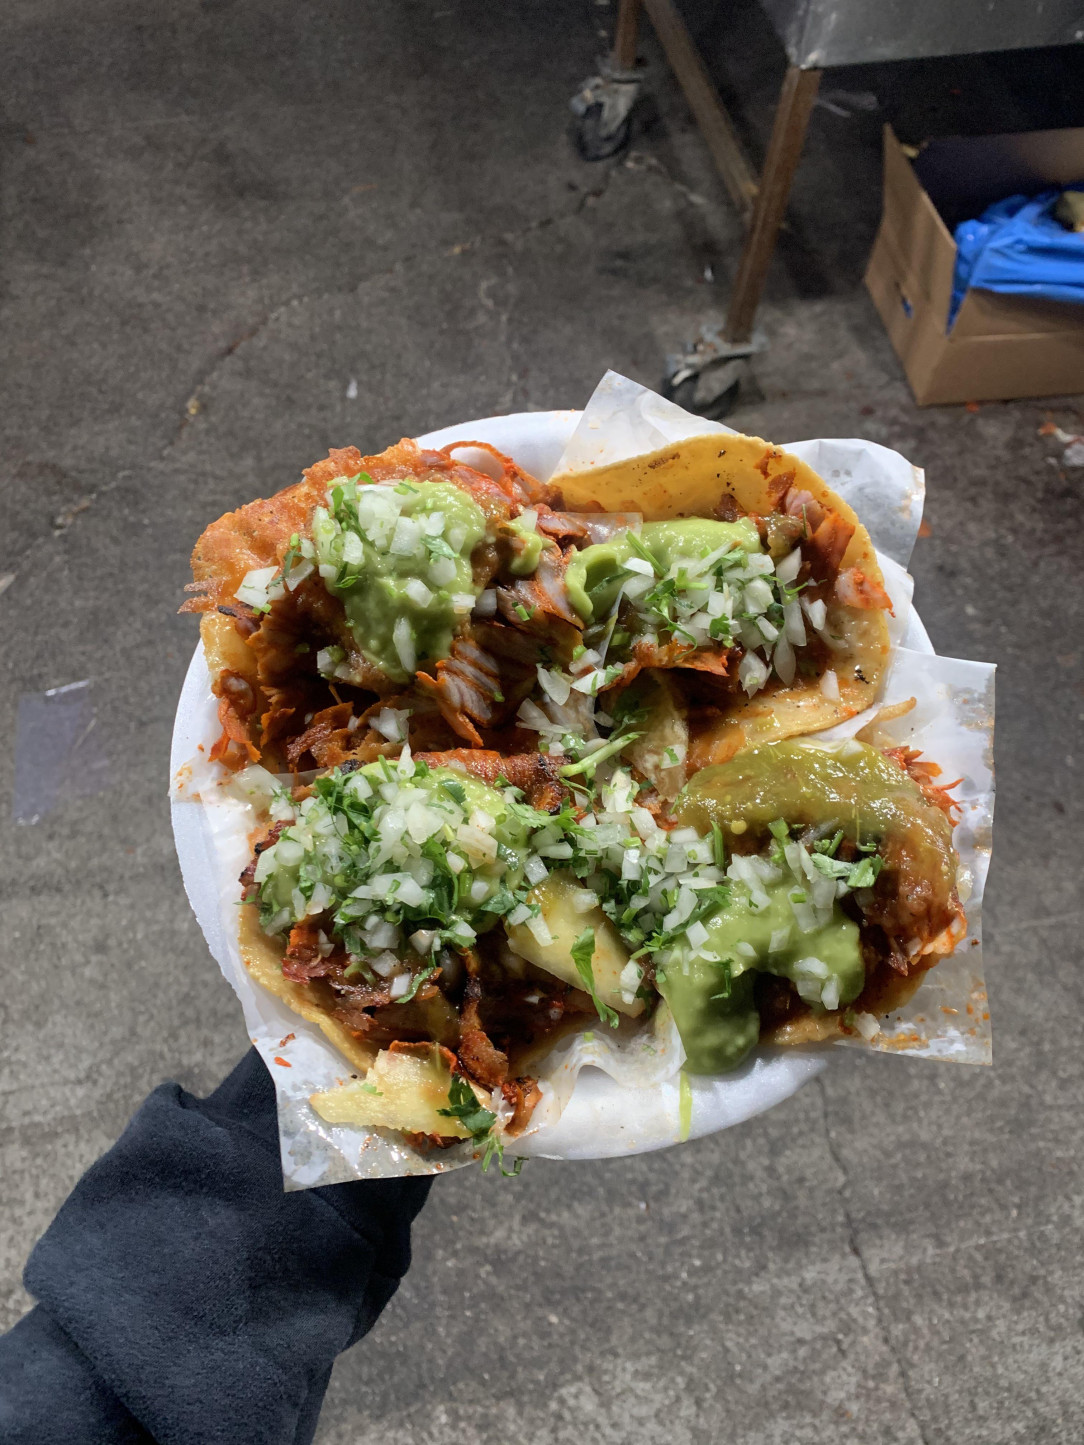 Al Pastor queso tacos with handmade tortilla! By far the best tacos in LA